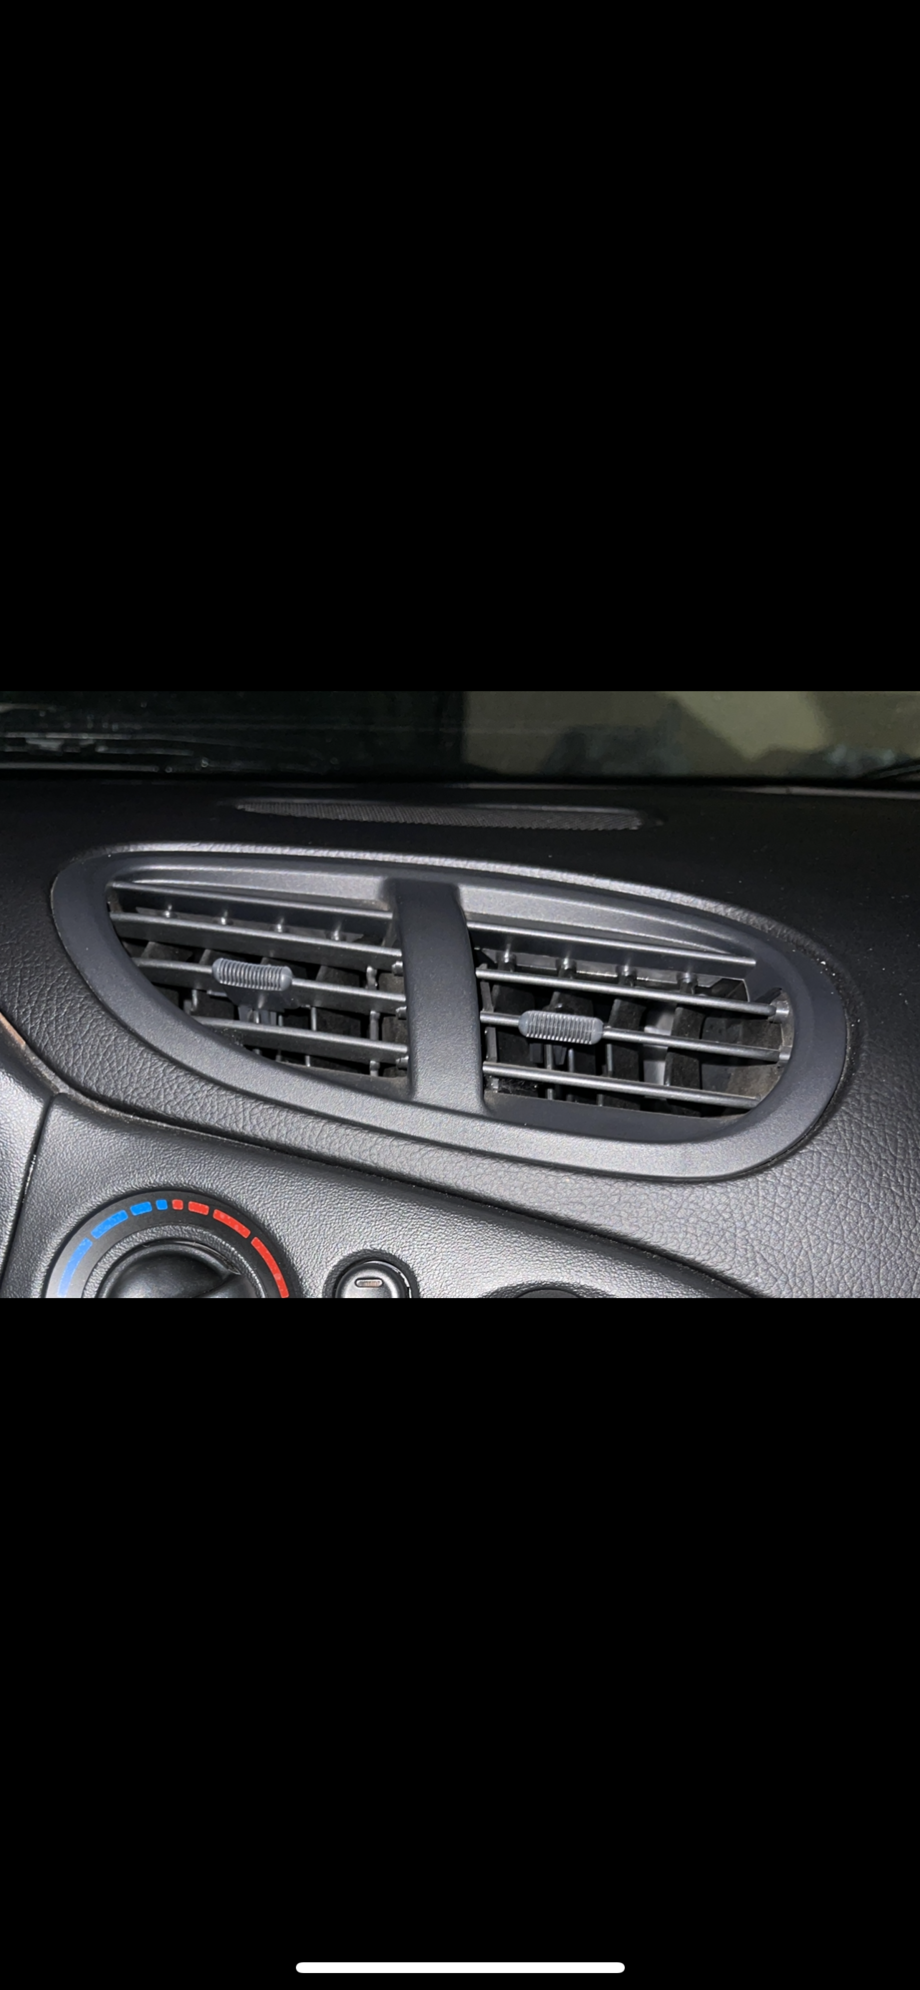 Interior/Upholstery - Vent Grille ( discontinued) - New or Used - 1993 to 2002 Mazda RX-7 - Miami, FL 33166, United States